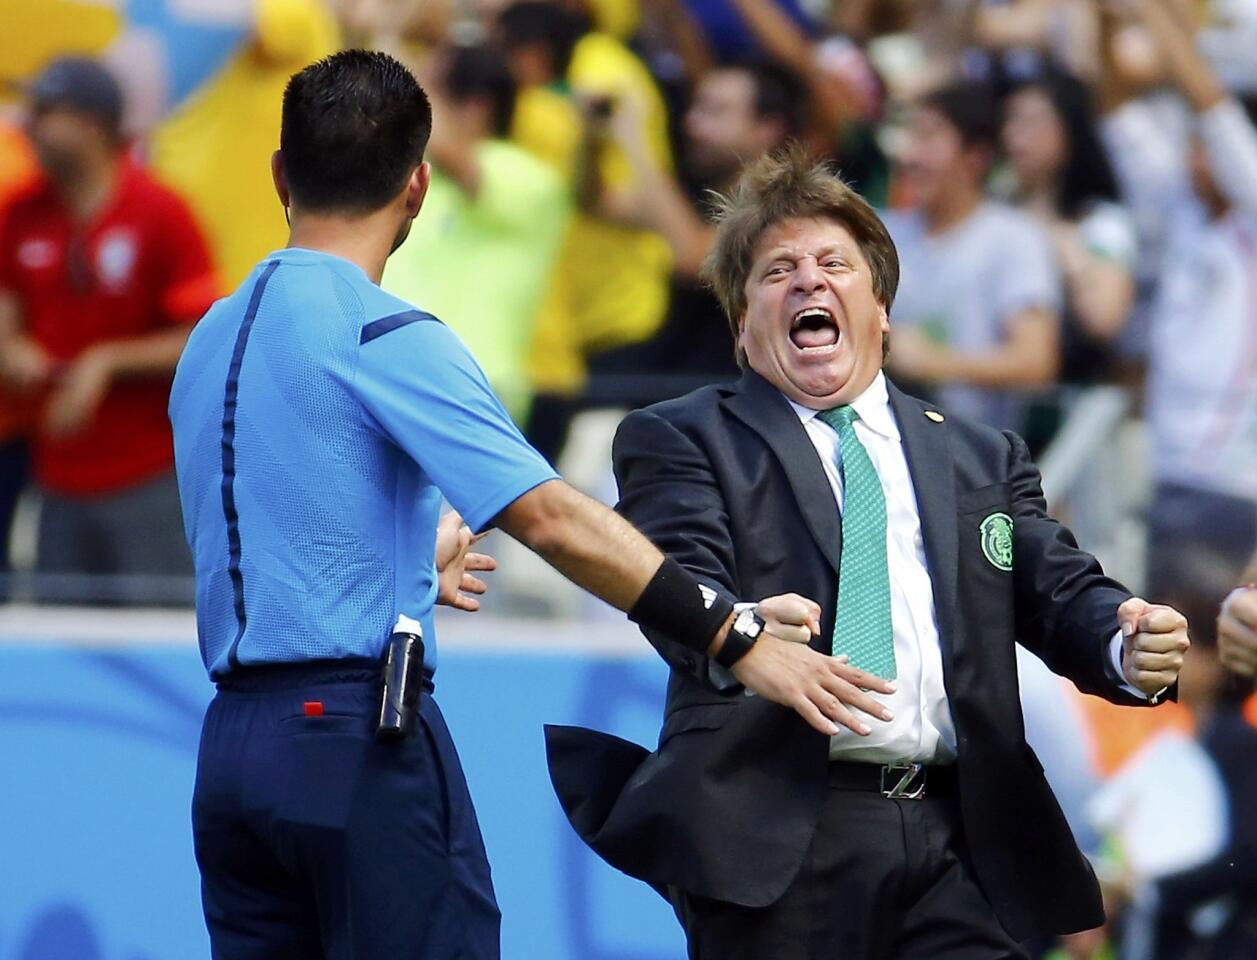 Mexico's coach Herrera celebrates after Dos Santos scored a goal against the Netherlands during their 2014 World Cup round of 16 game at the Castelao arena in Fortaleza